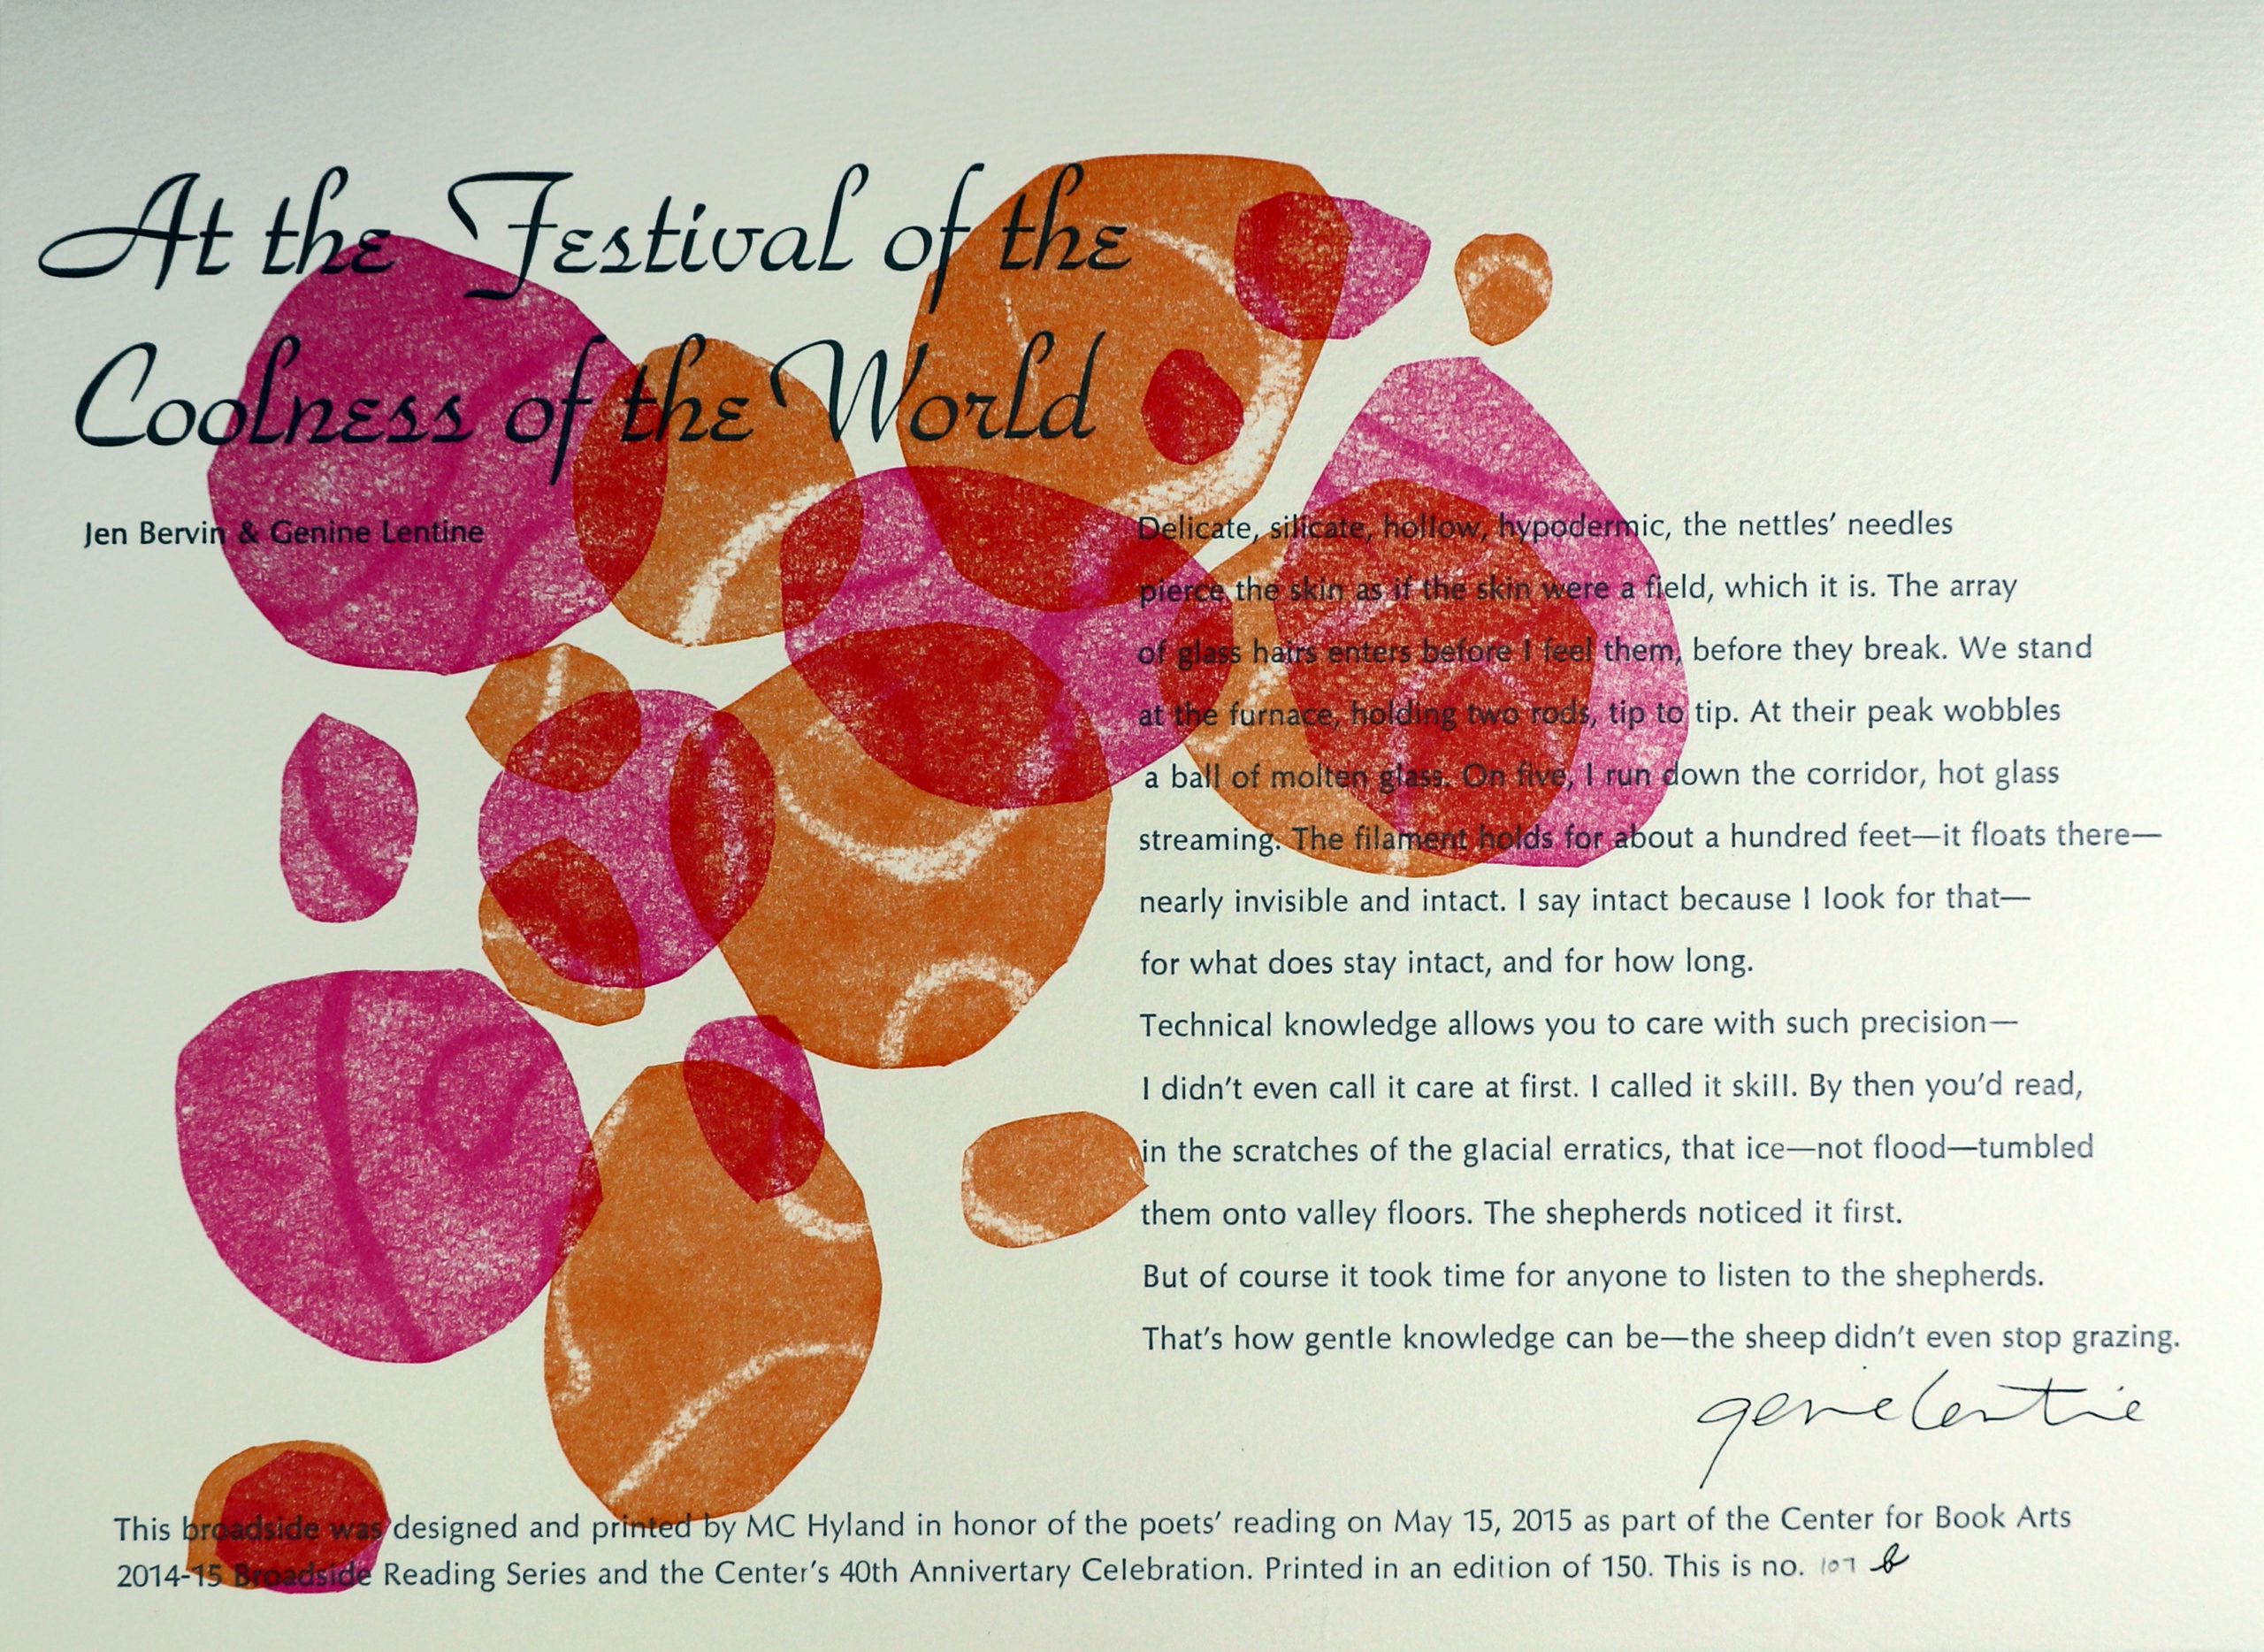 A letterpress printed broadside on cream-colored paper, with overlapping pink and orange shapes.